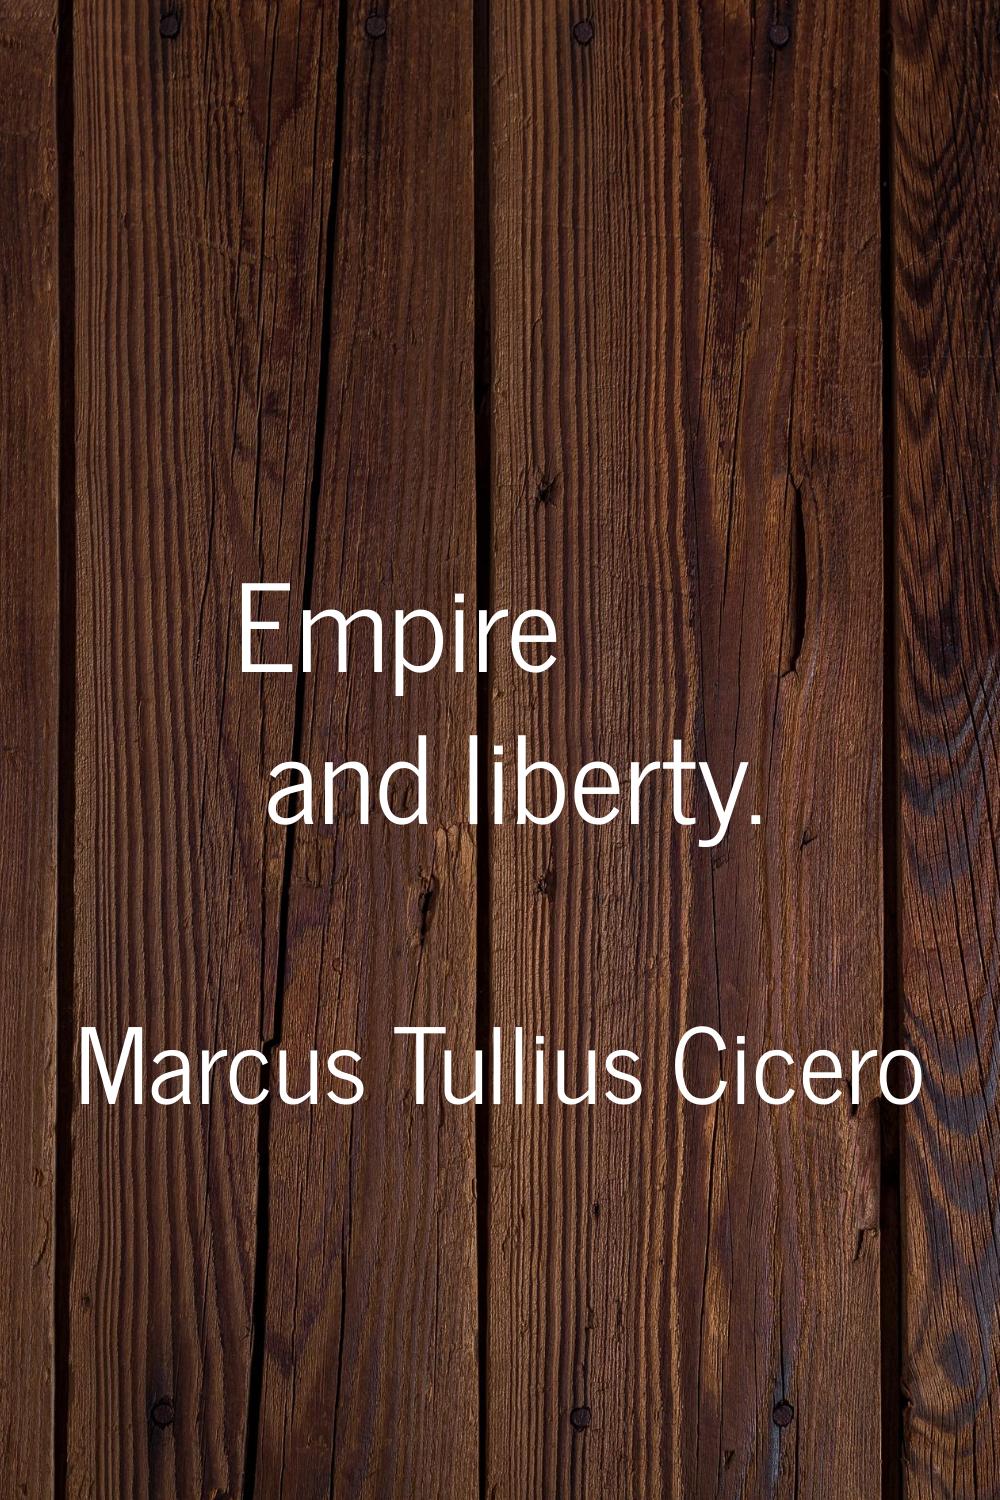 Empire and liberty.